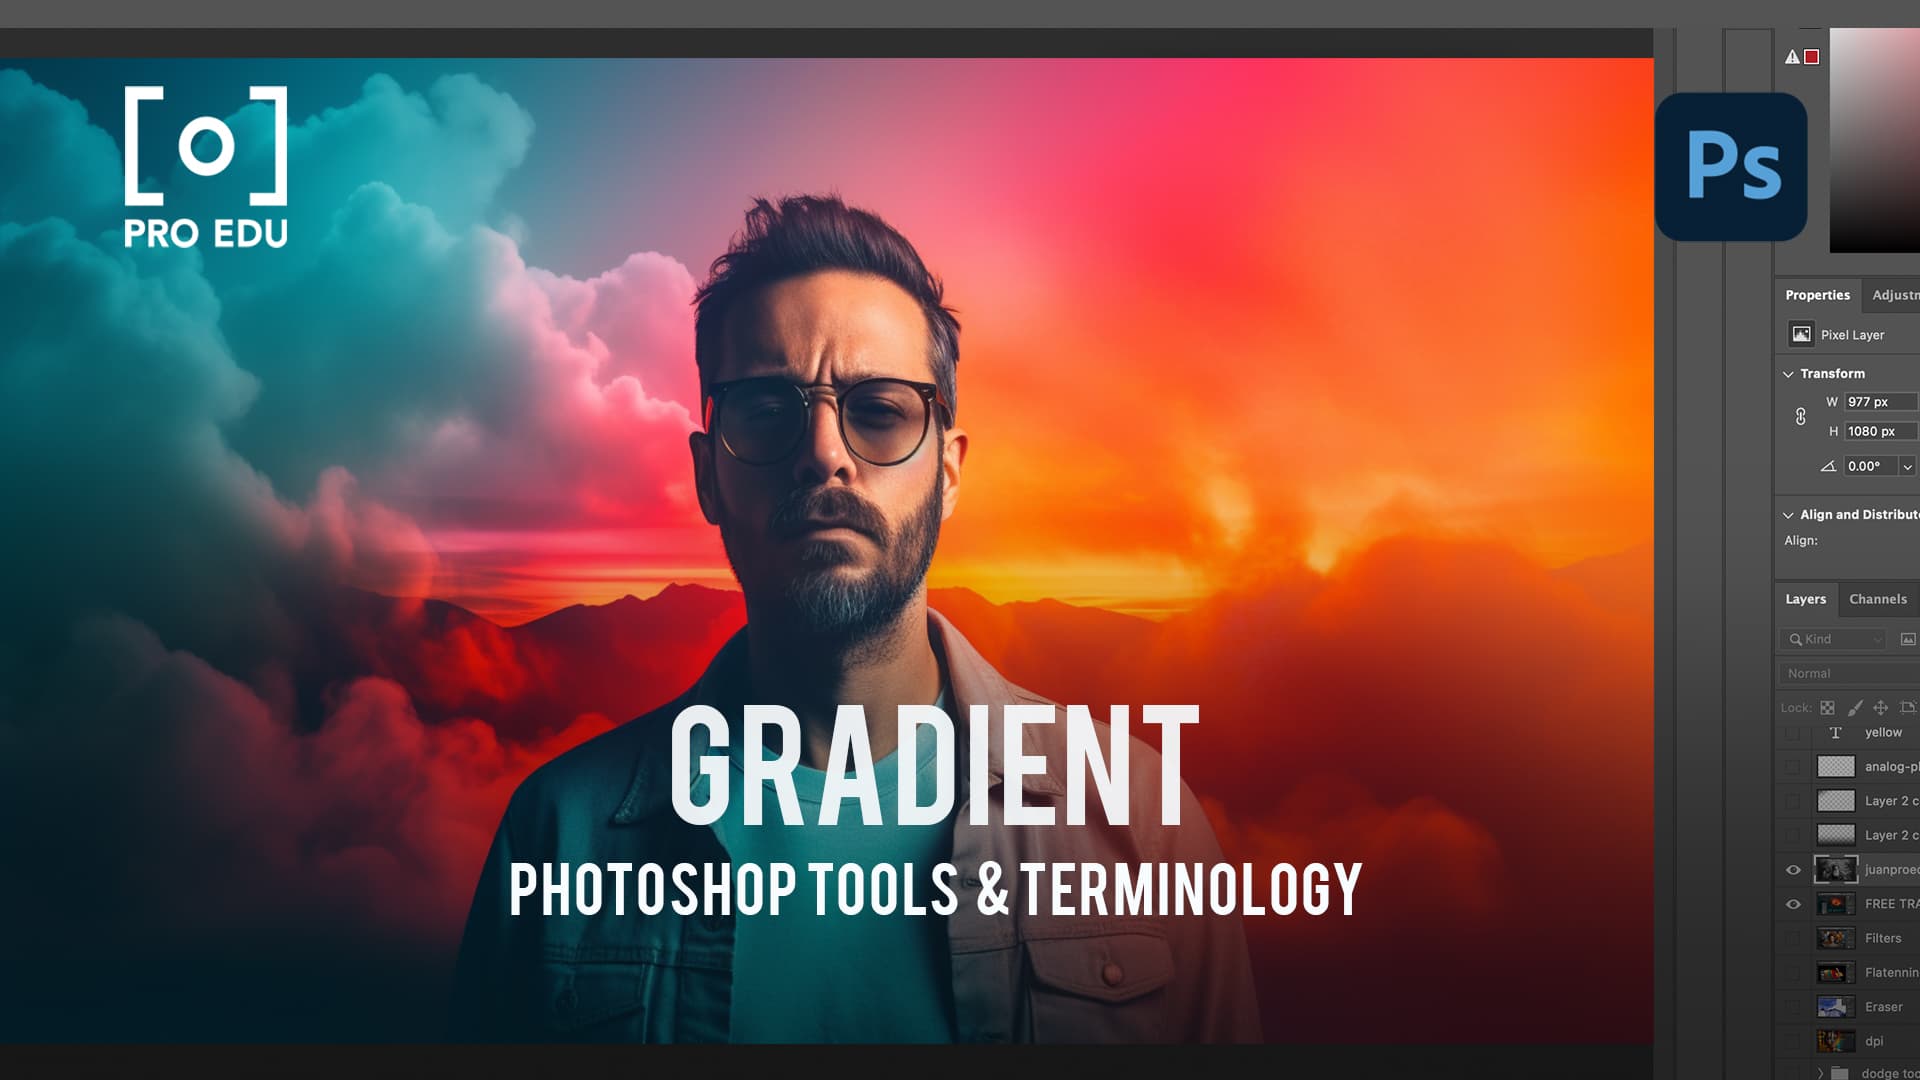 Unlock Creativity: How to Invert Colors in Photoshop?